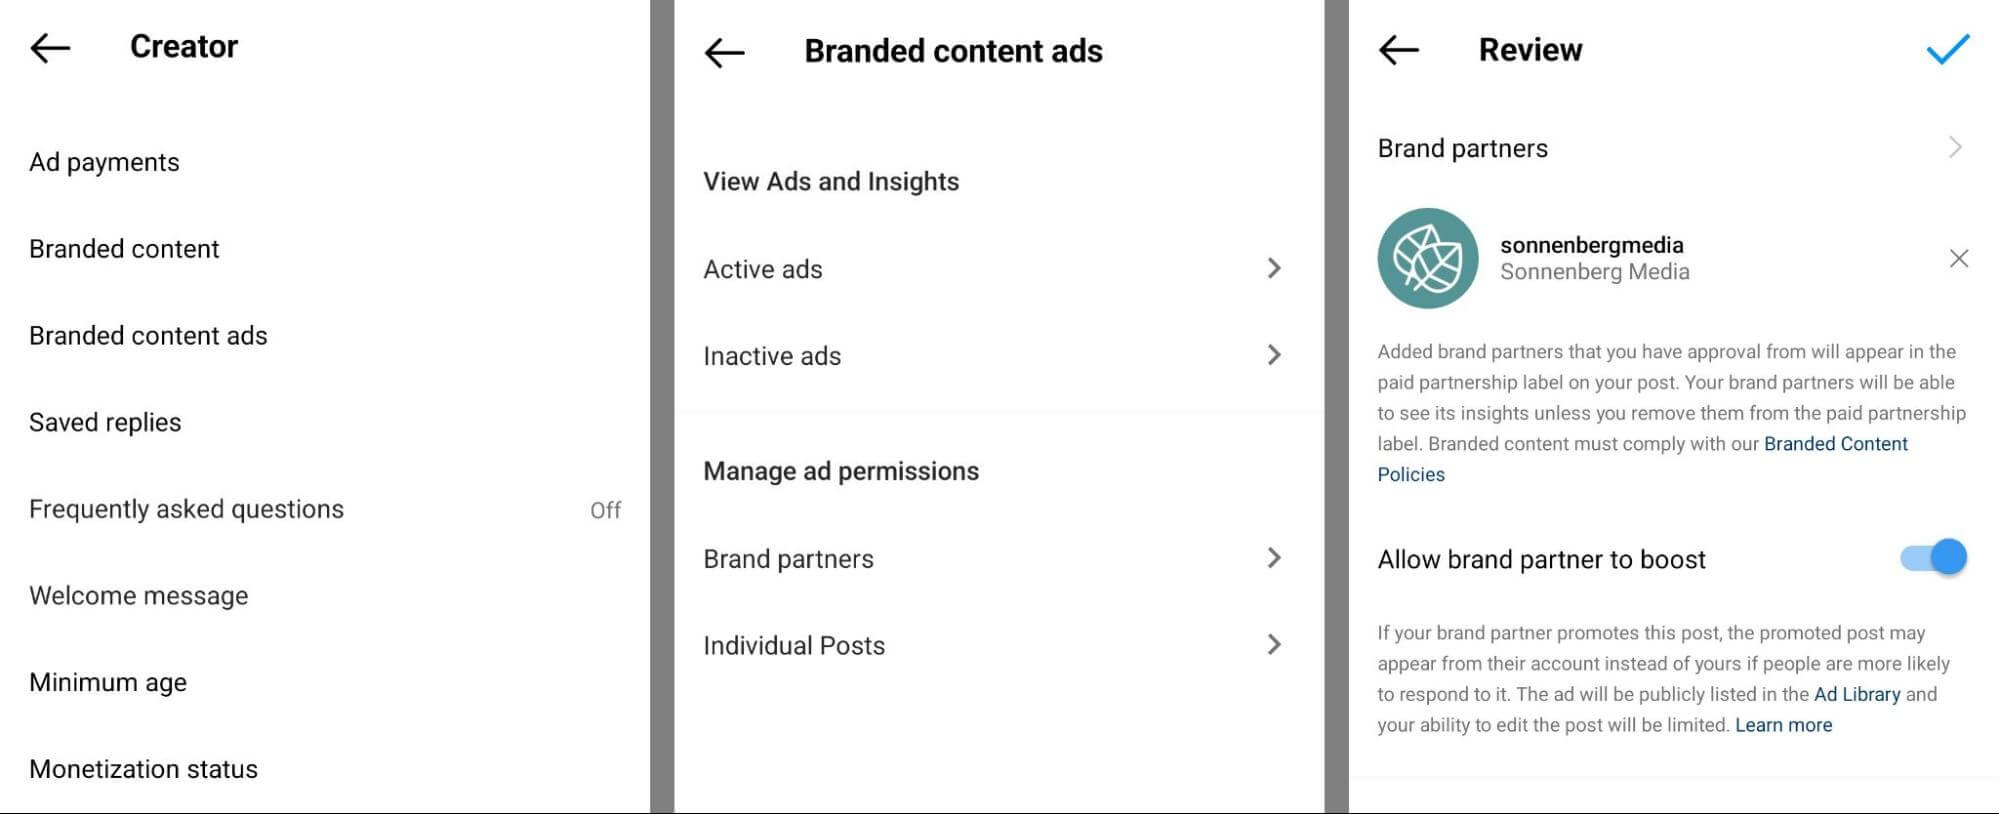 advertising-campaigns-how-to-use-social-proof-in-instagram-ads-branded-content-tool-allow-brand-partner-boost-sonnenbergmedia-example-9